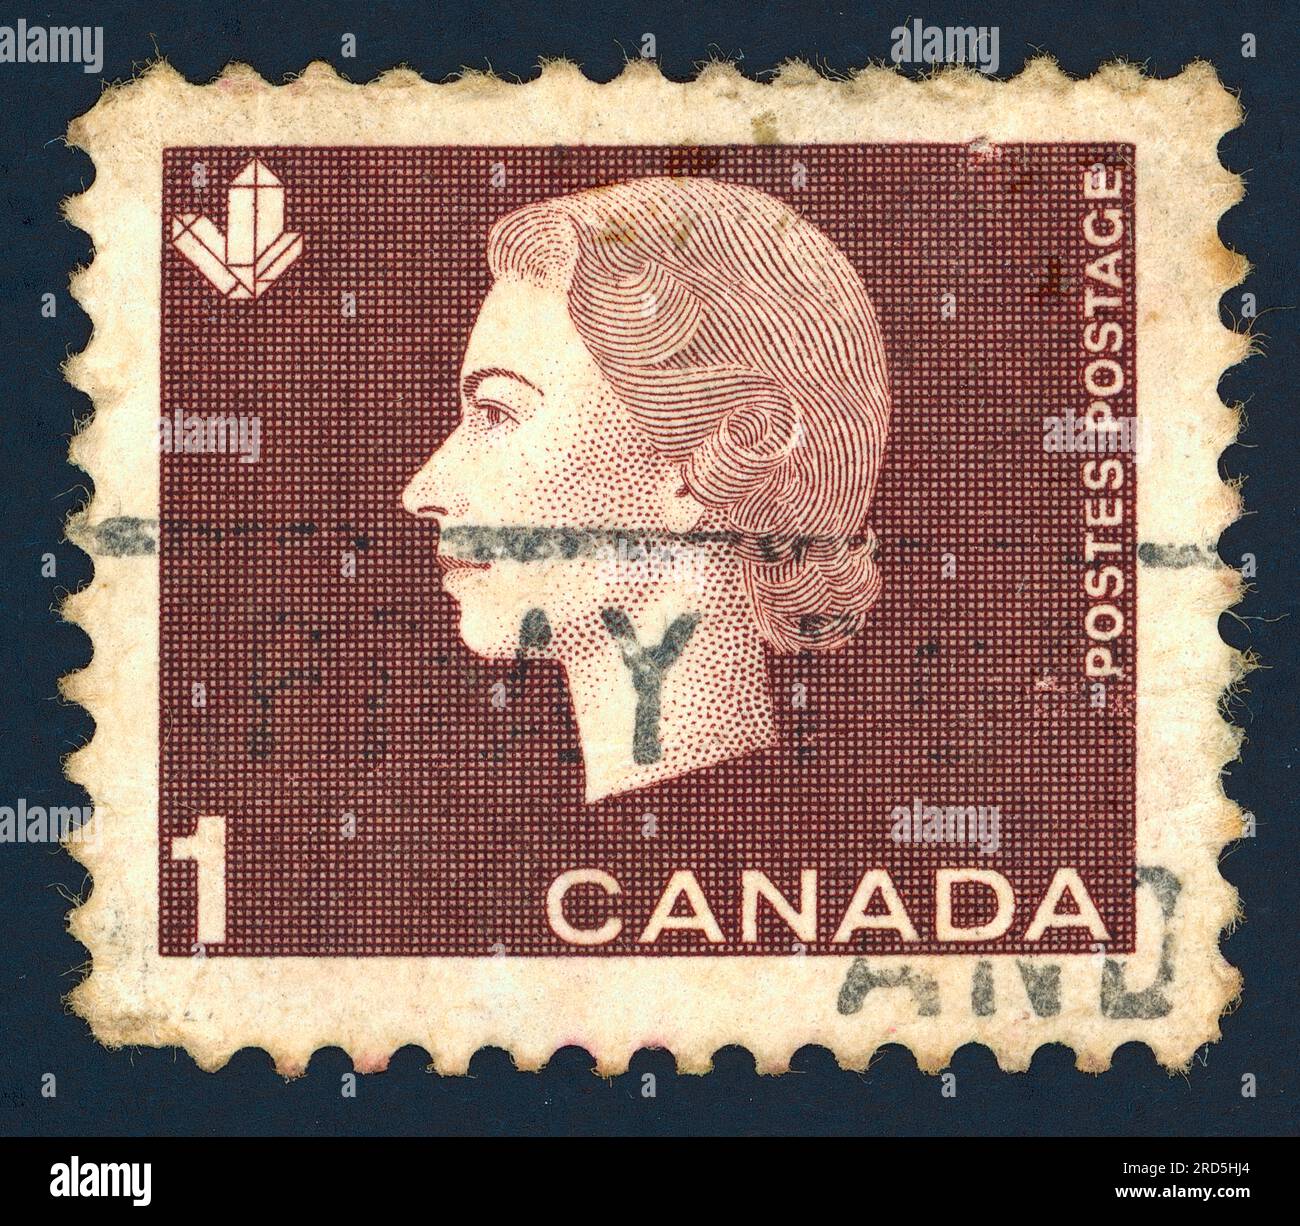 Queen Elizabeth II. Postage stamp issued in Canada in 1960s. Stock Photo